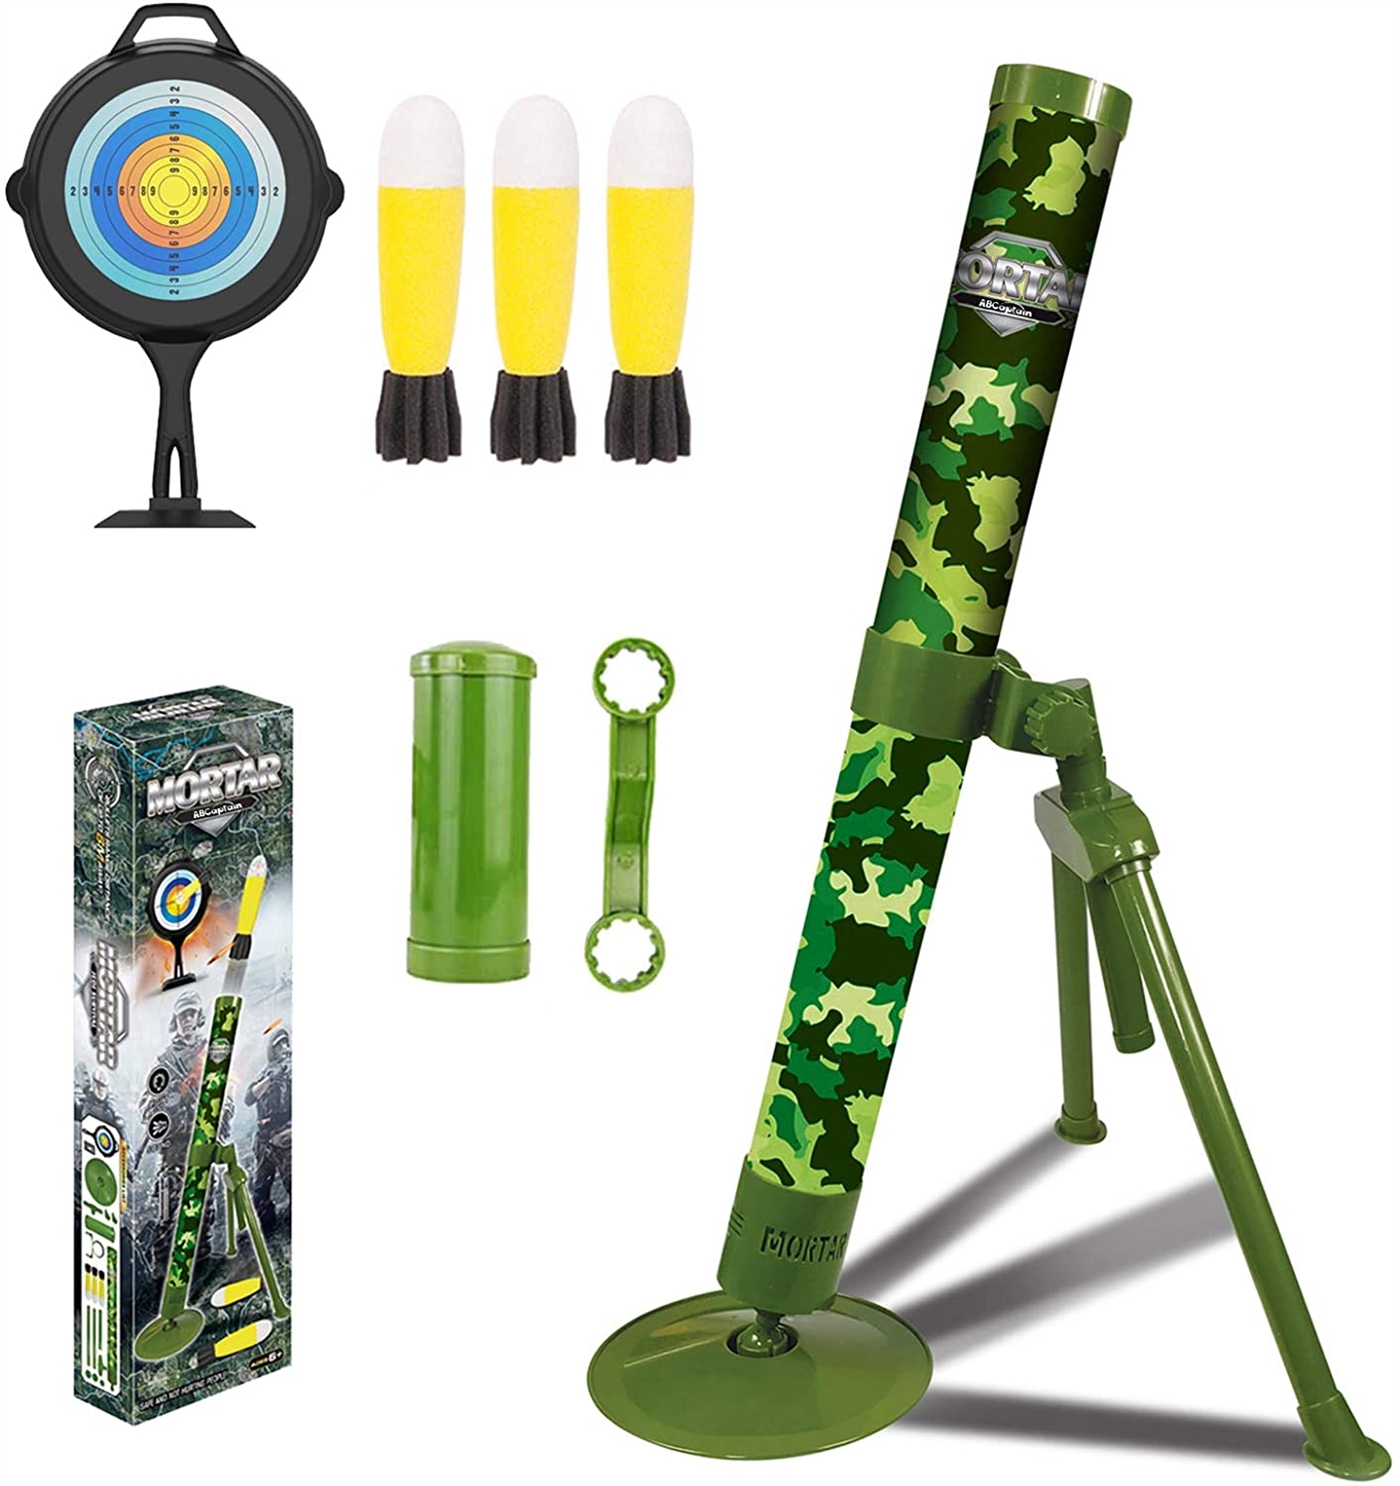 The mortar launcher comes with three sponge missiles that won't hurt kids.